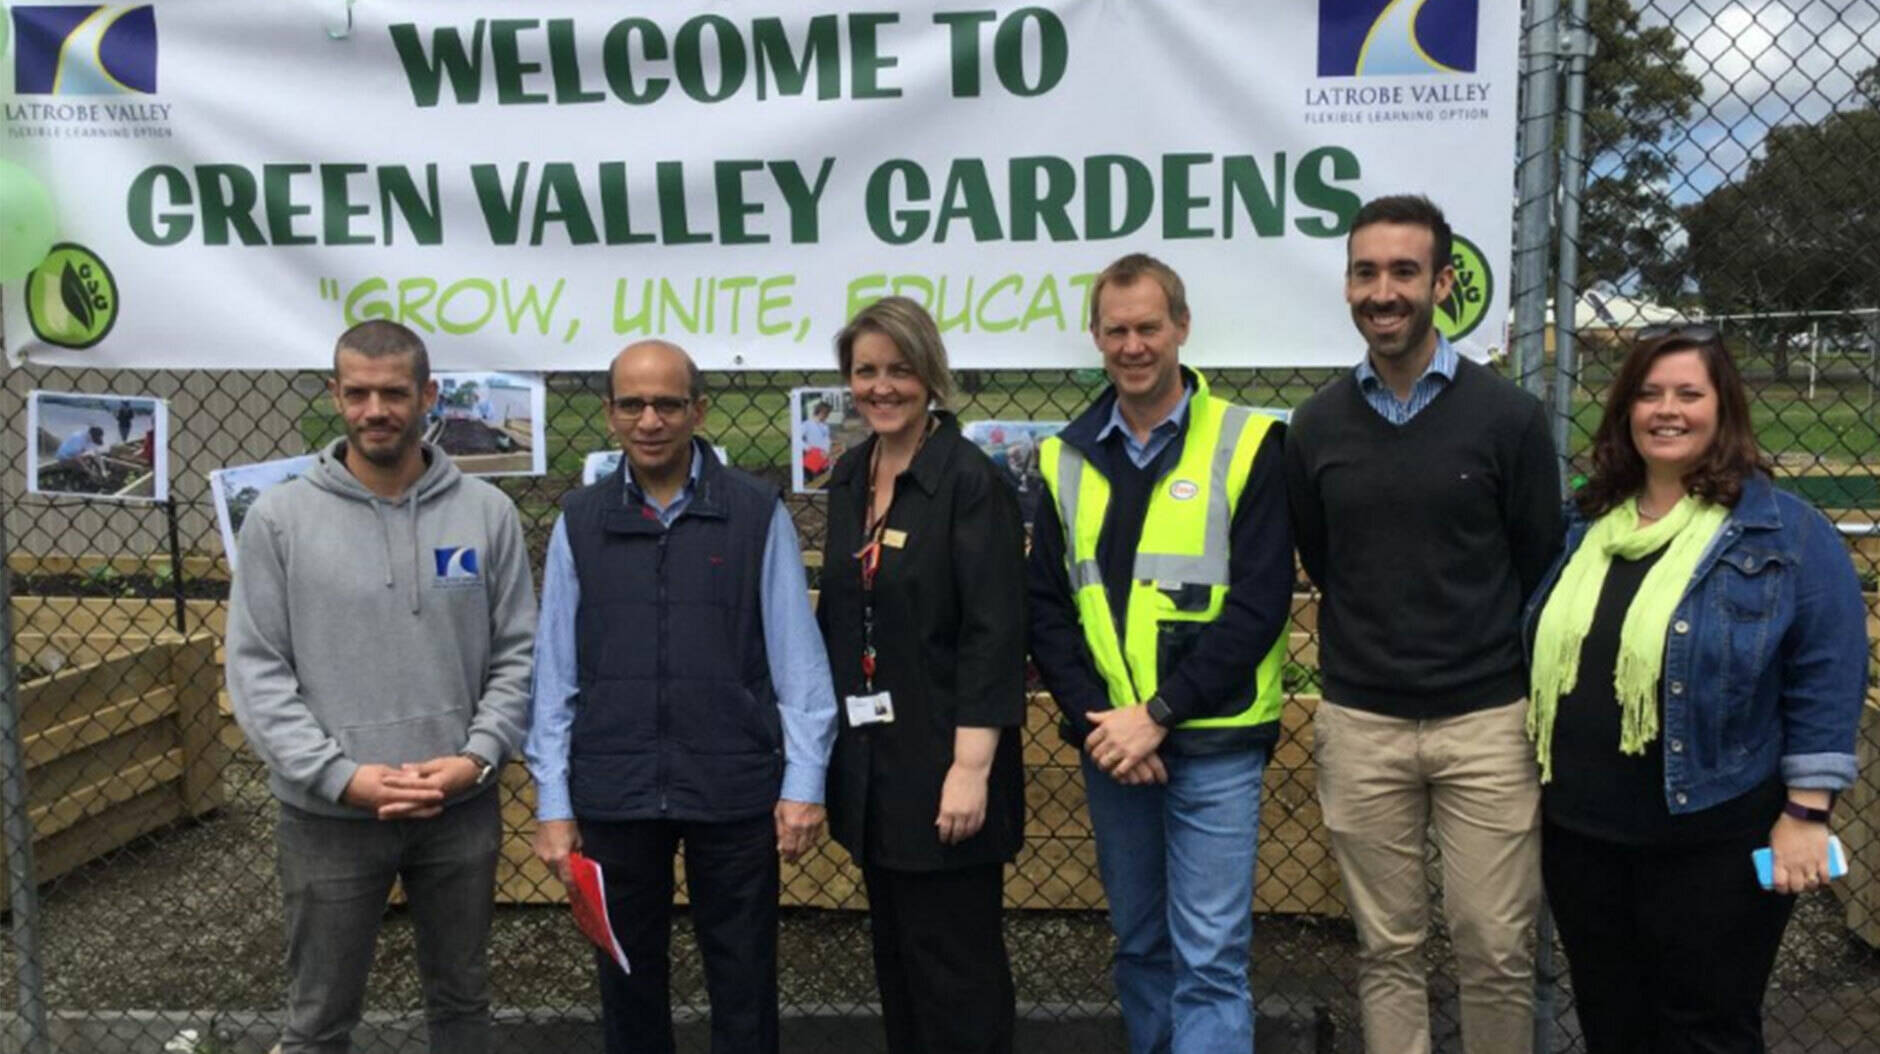 Image Photo — Representatives from Latrobe Valley Flexible Learning Option, Esso, Conservation Volunteers Australia and VicHealth joined Latrobe Valley Mayor, Kellie O’Callaghan (centre), in launching the community garden on 31 October 2017.